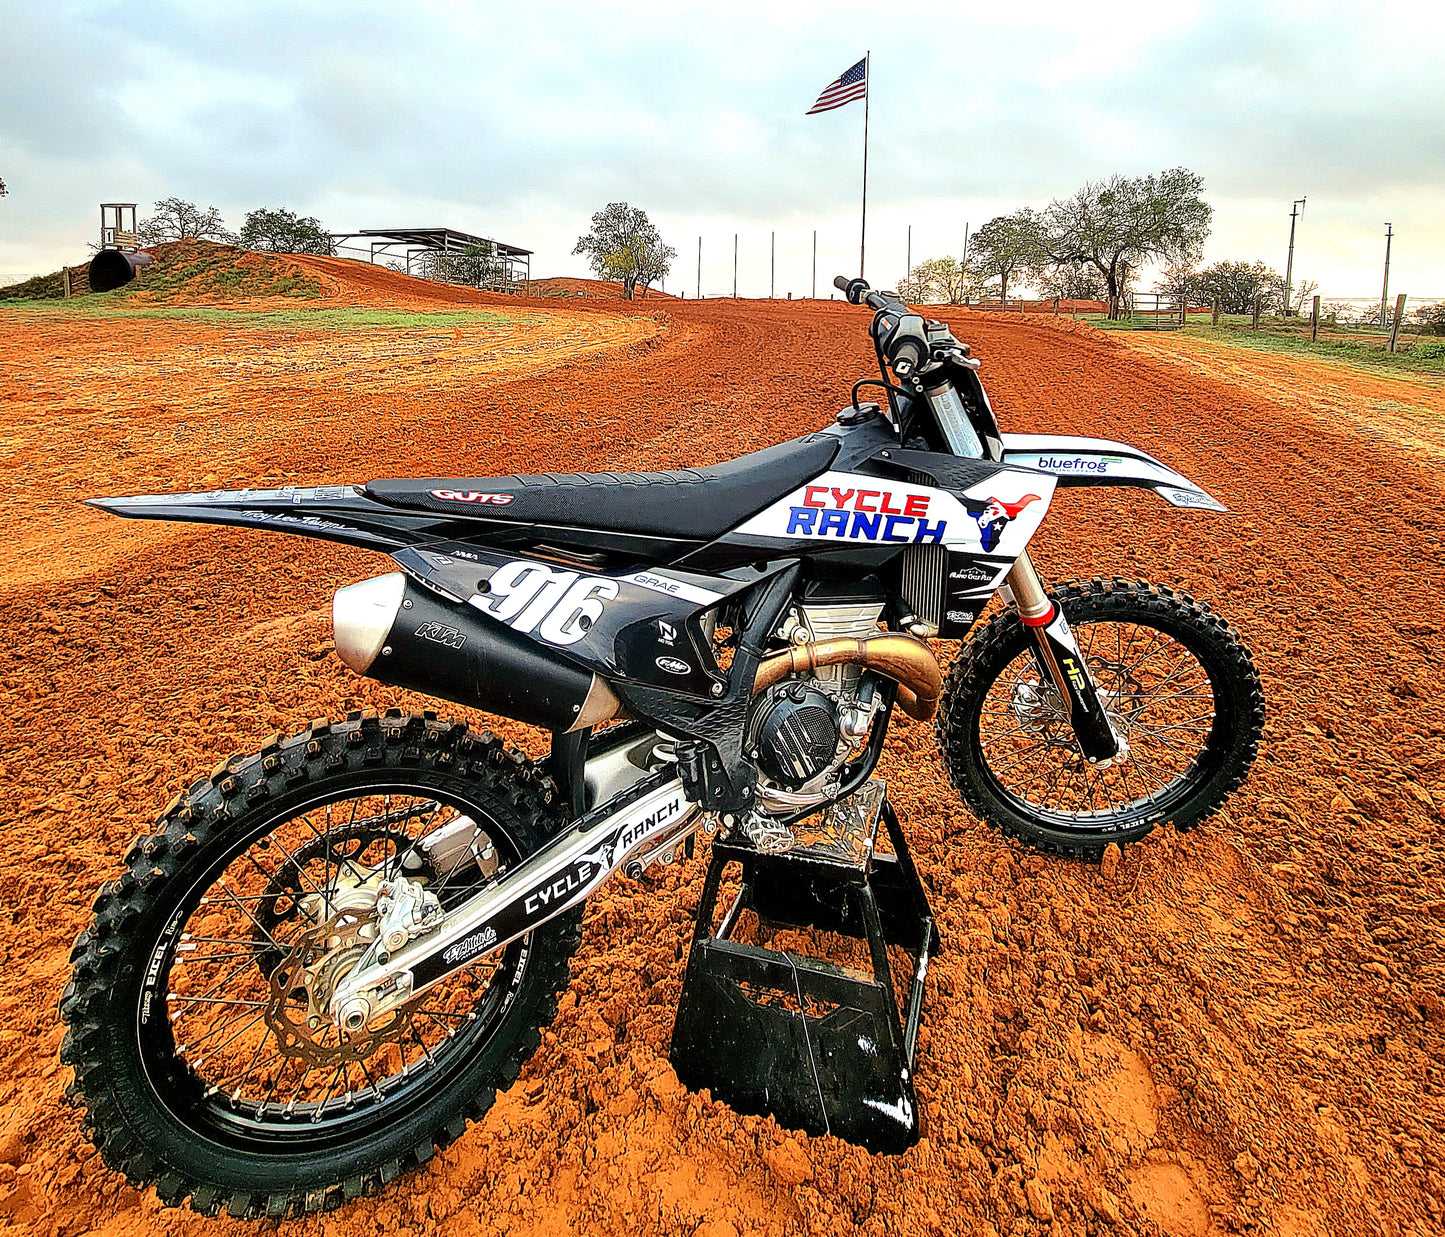 Cycle Ranch MX Graphics